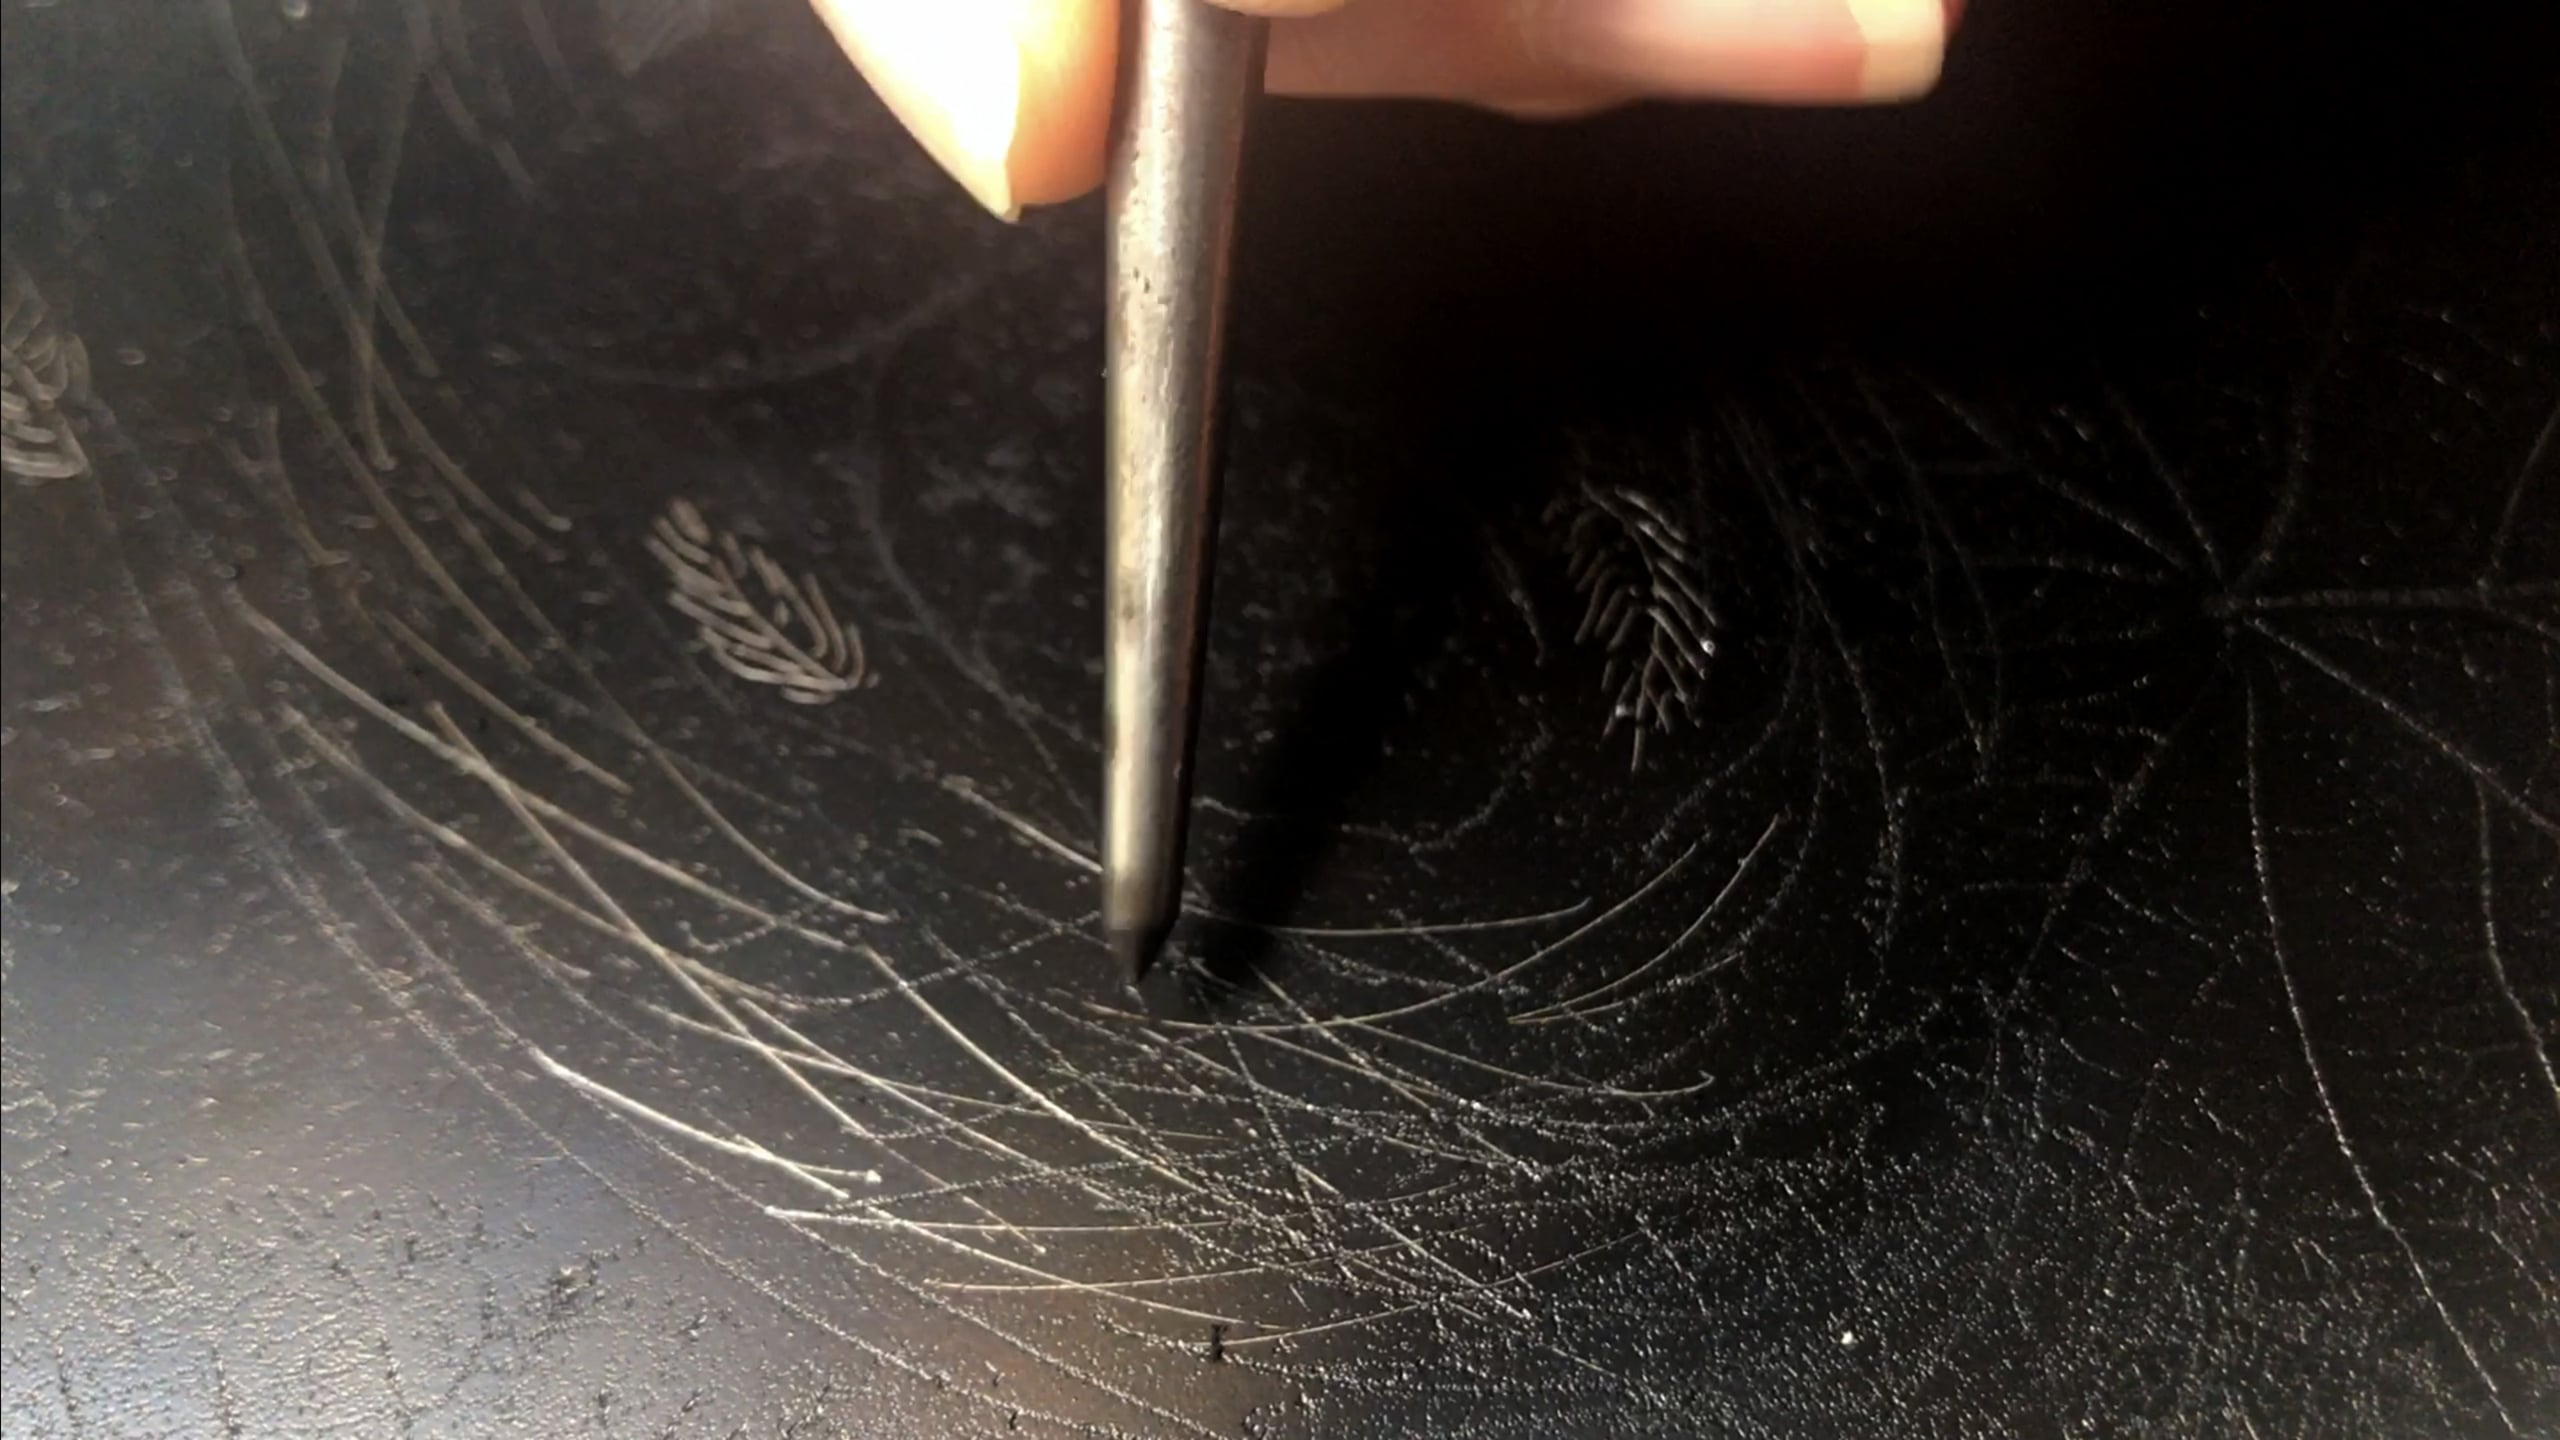 An etching being completed by a person engraving the stencil